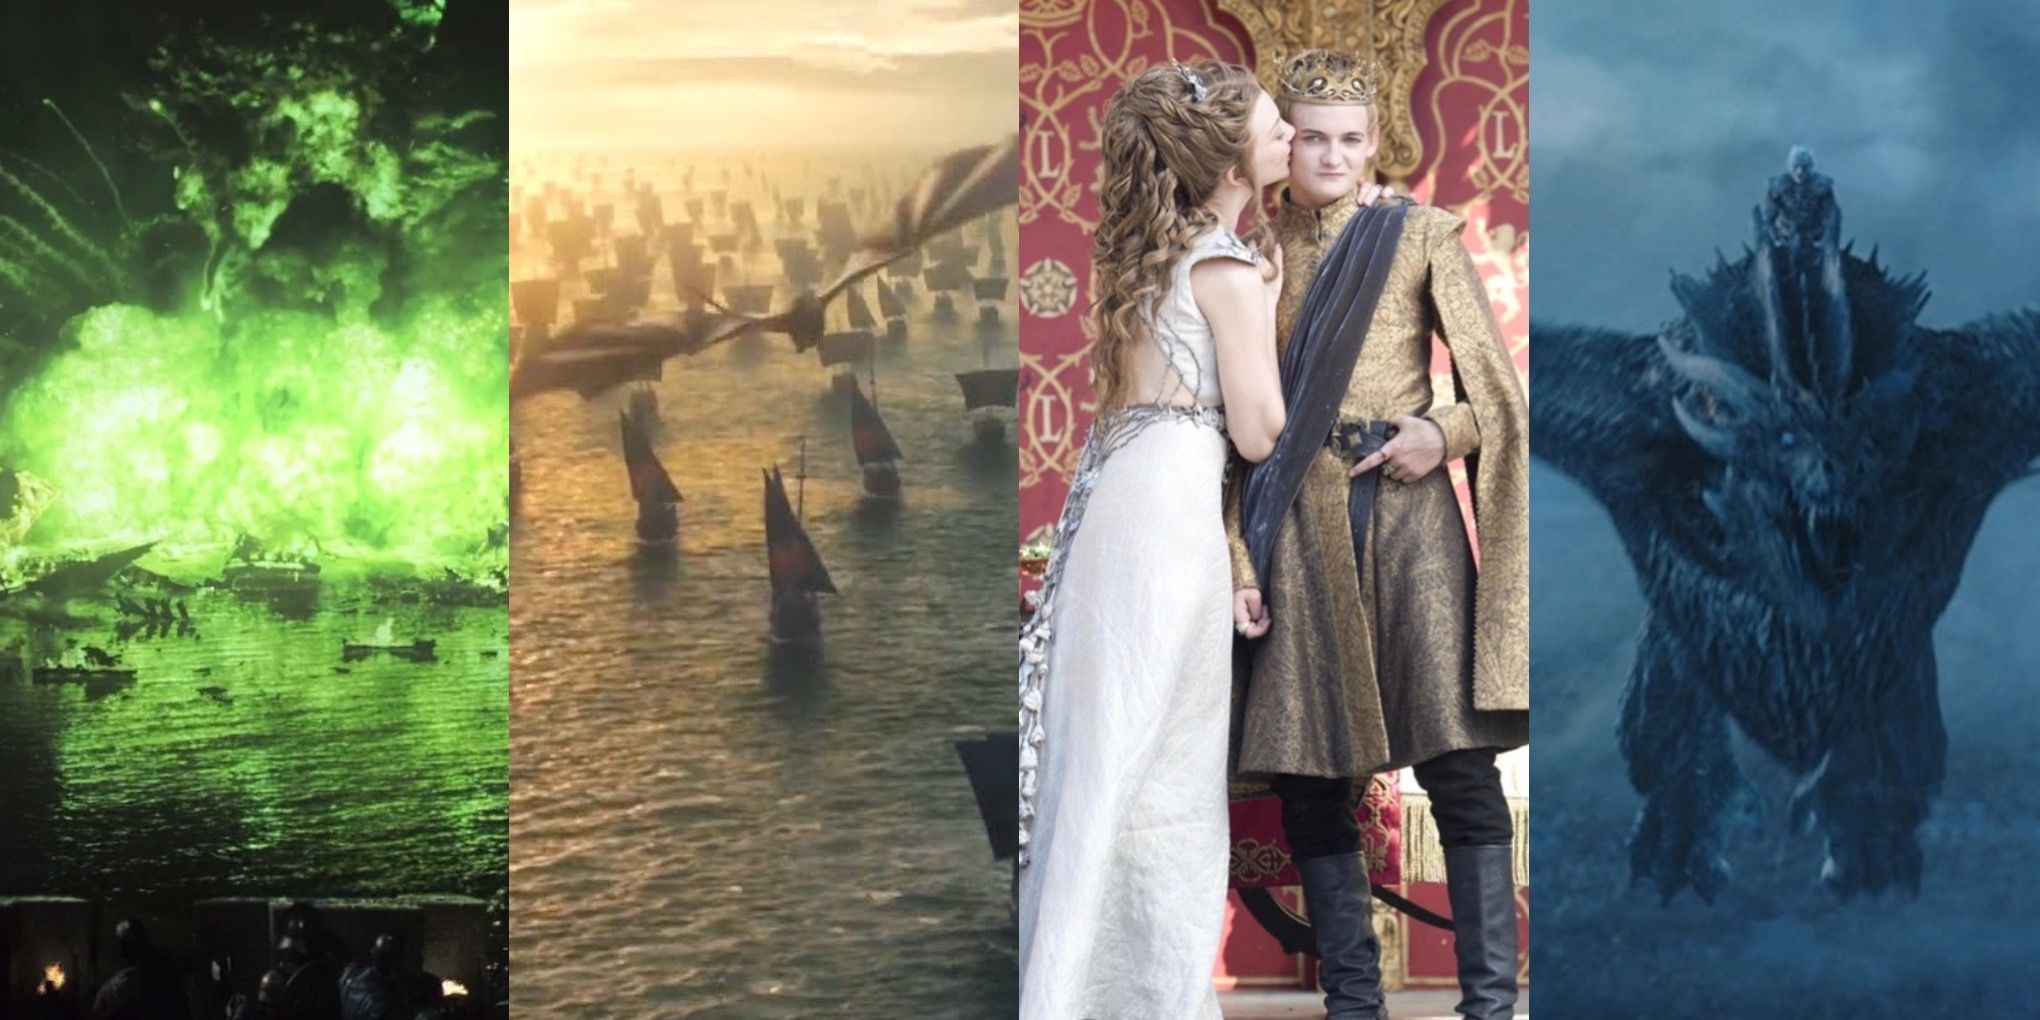 10 Best Episodes Of Game Of Thrones According To Reddit